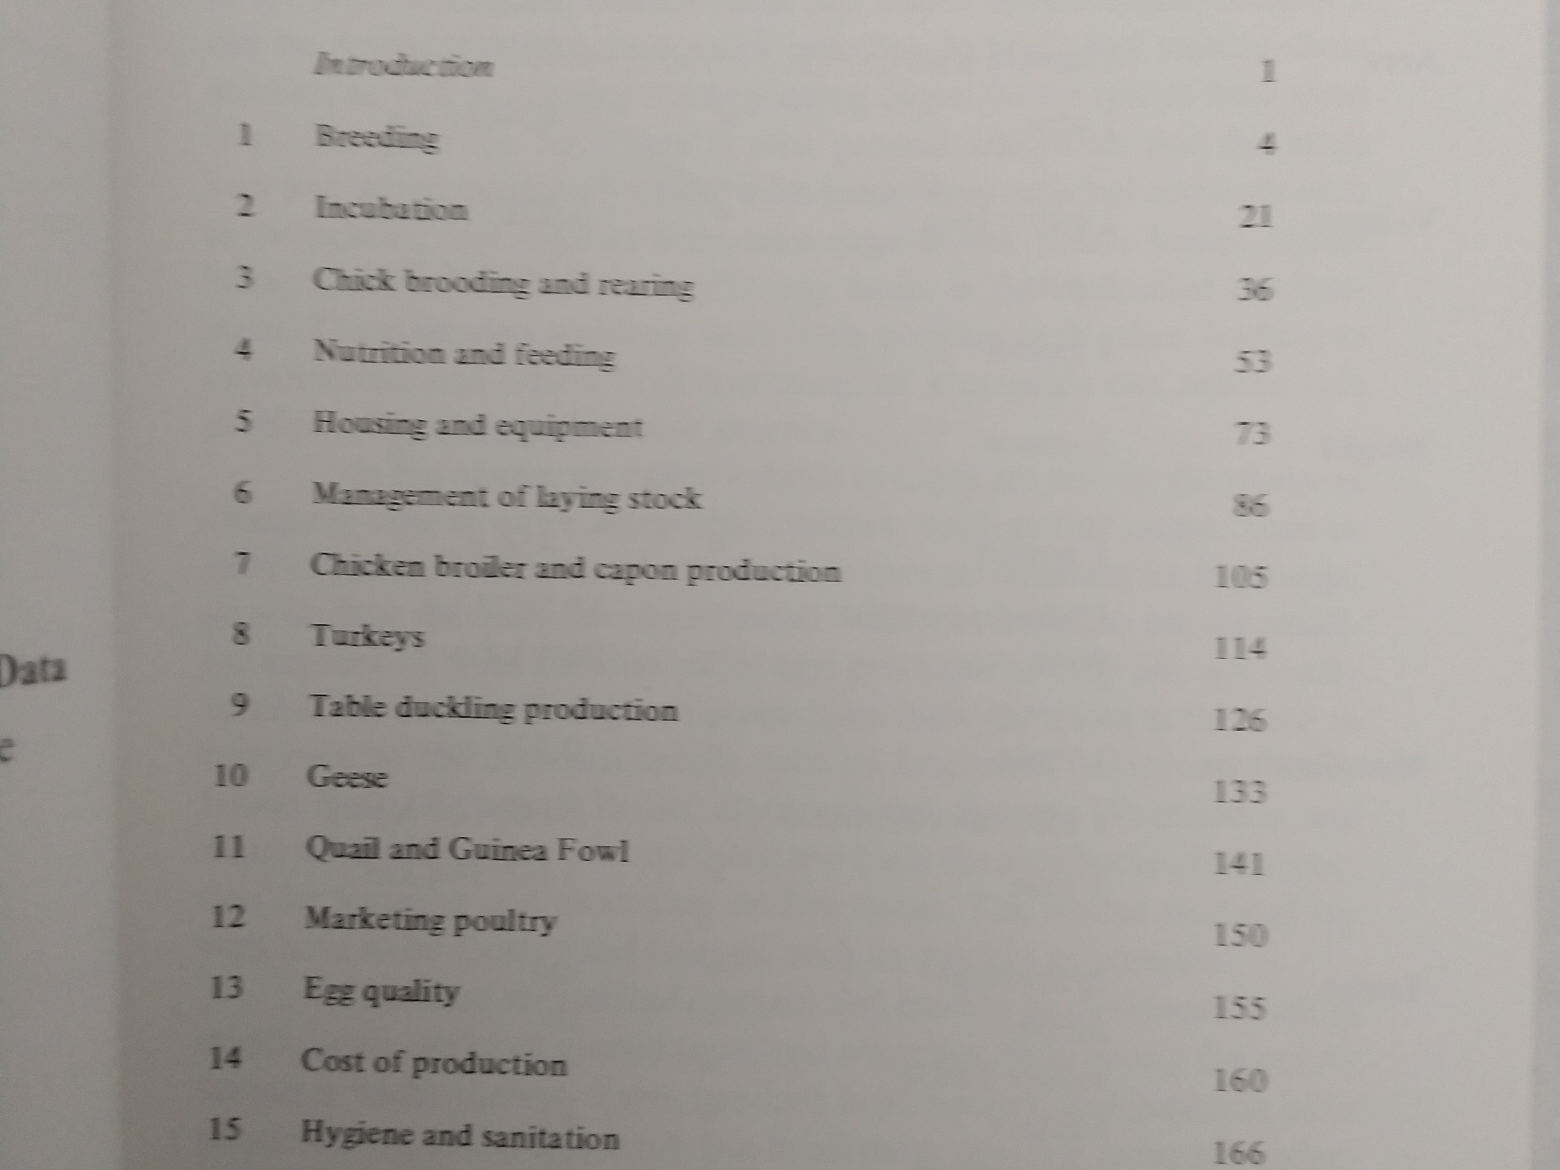 Practical Poultry Keeping by Joseph Batty